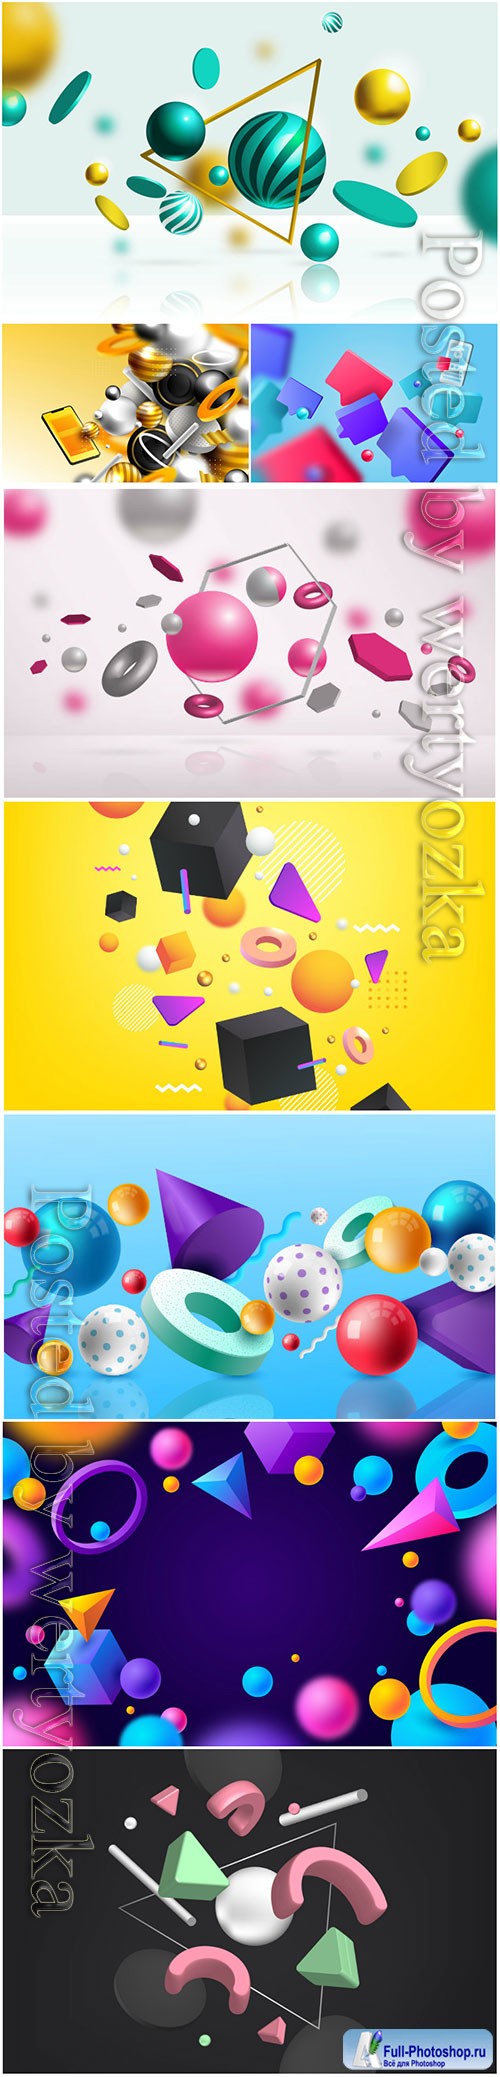 3d vector background with colorful shapes